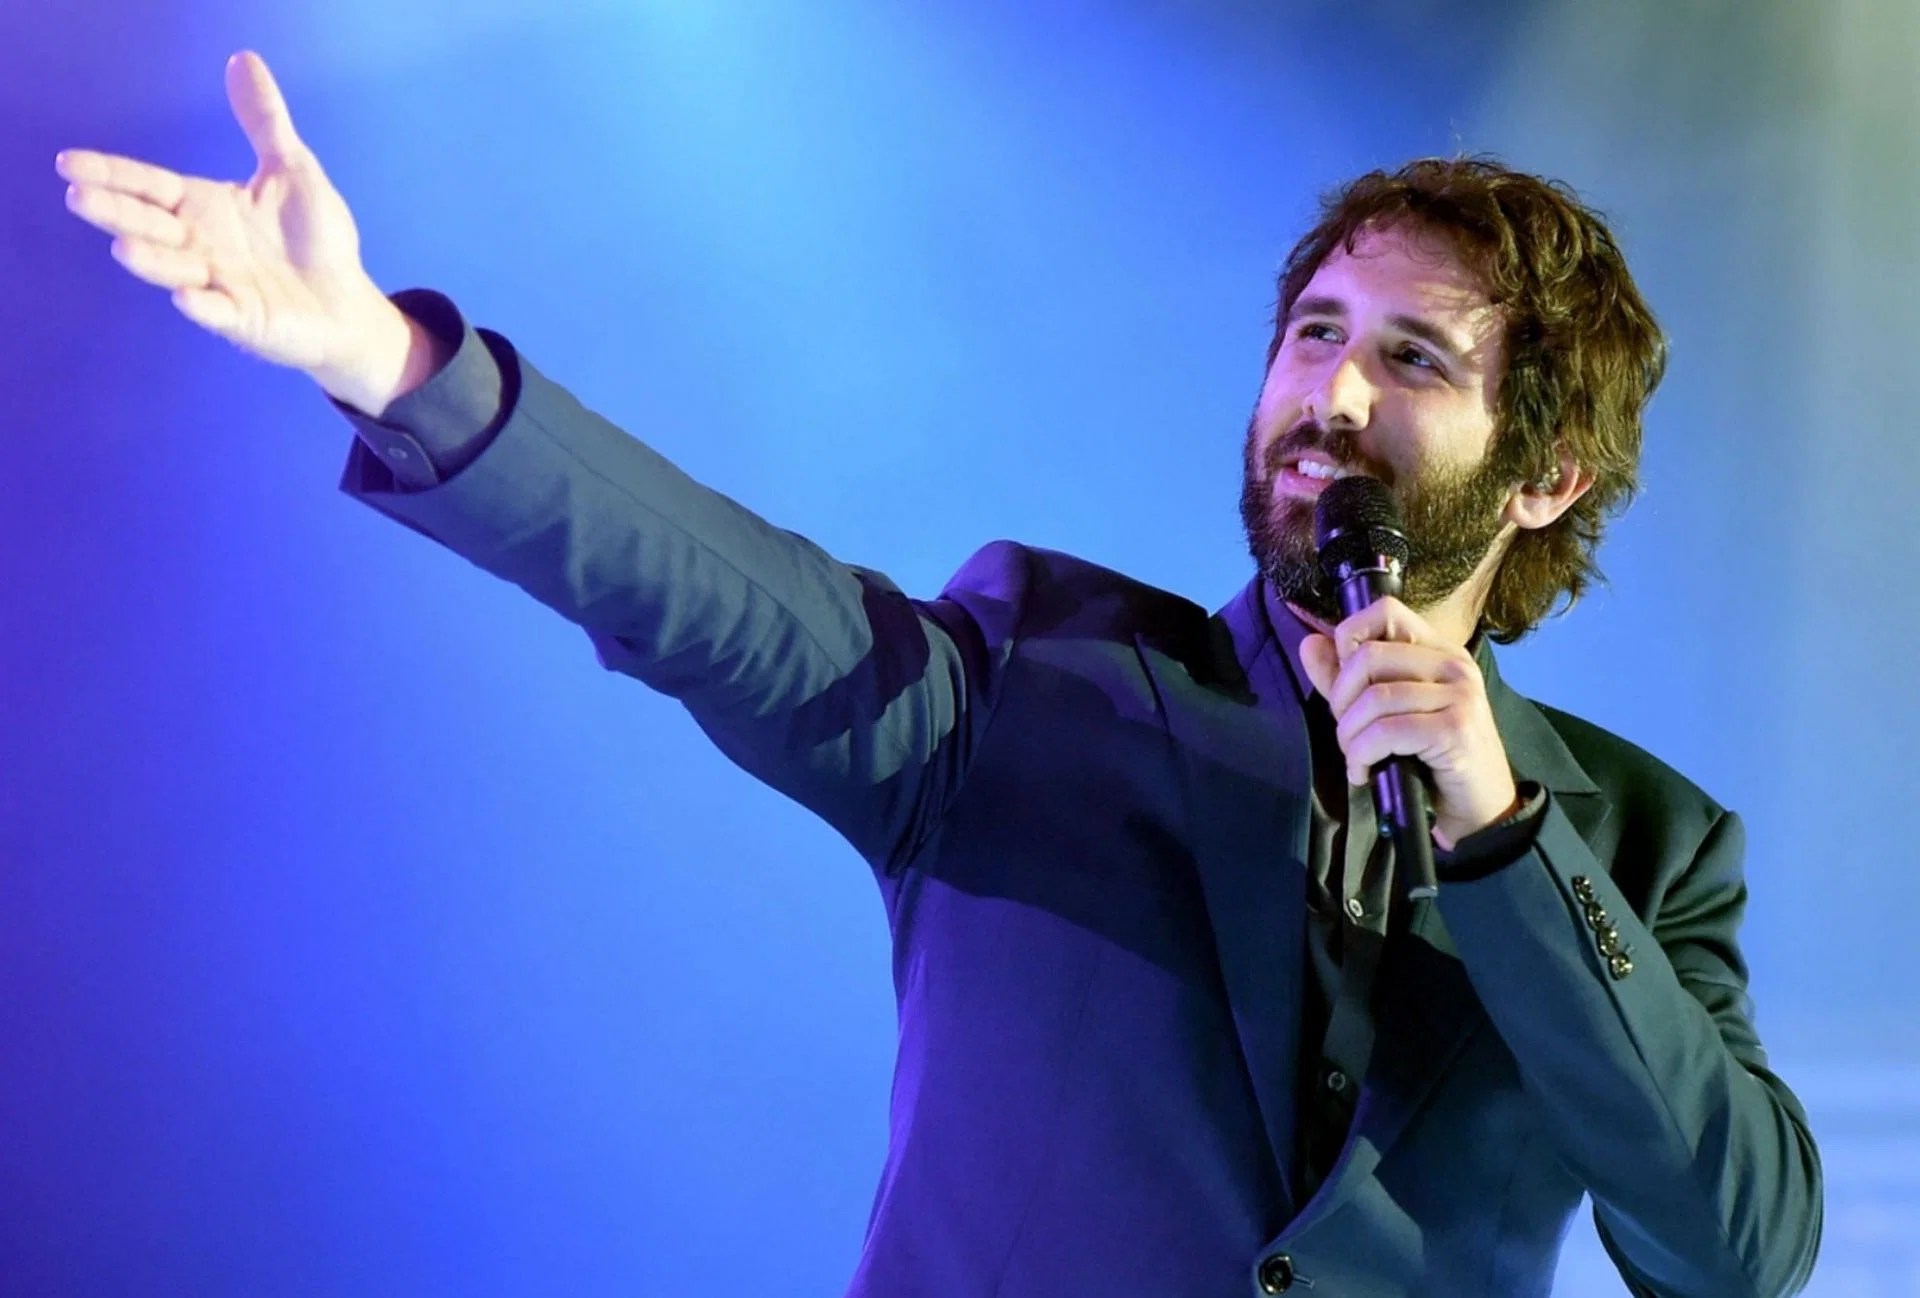 Josh Groban Harmony Tour 2022 tickets Where to buy, price, dates, and more